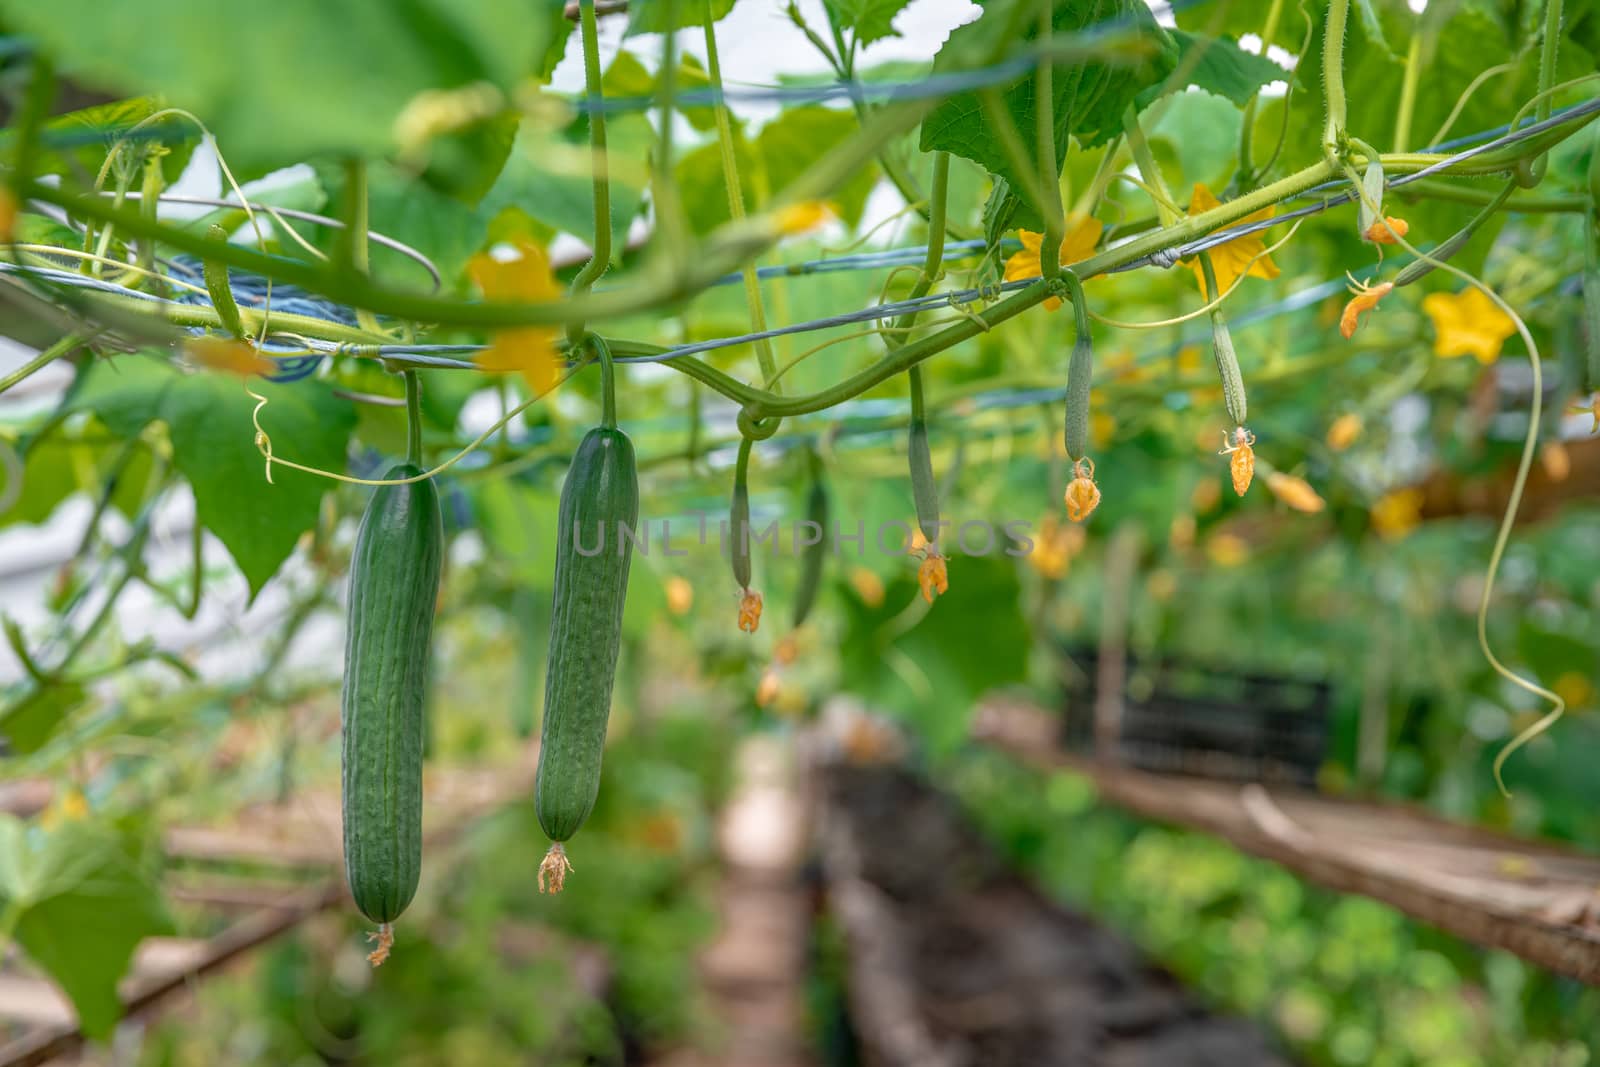 flowering plants green cucumbers growing in a greenhouse on the farm, healthy vegetables without pesticides, organic product.